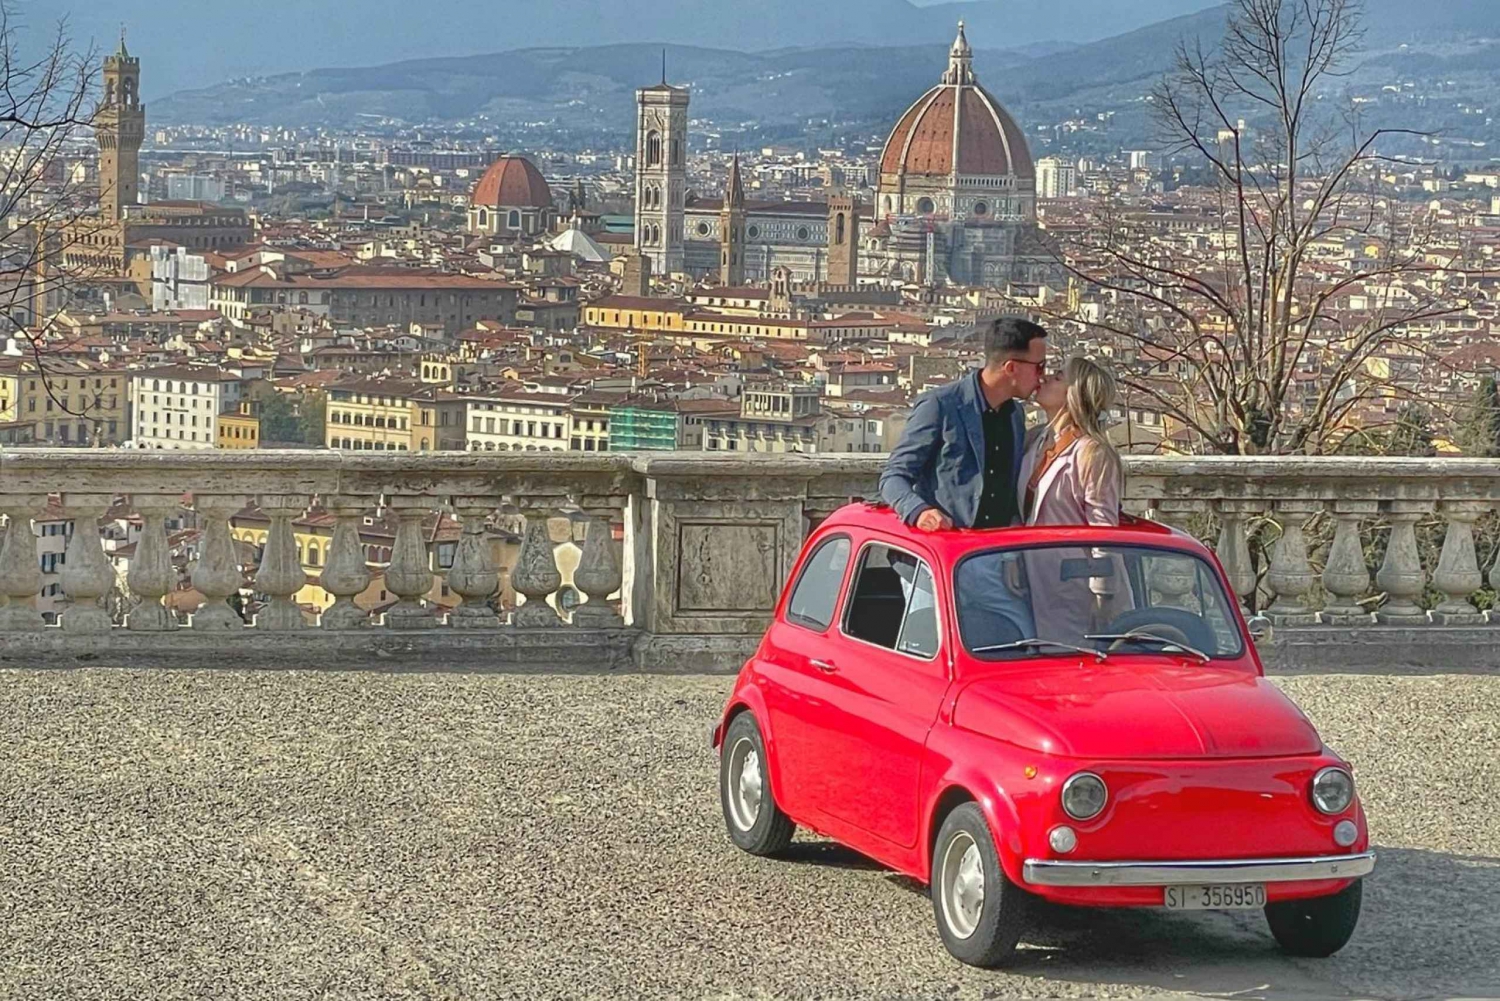 2-hour Vintage Fiat 500 tour with olive oil tasting at farm